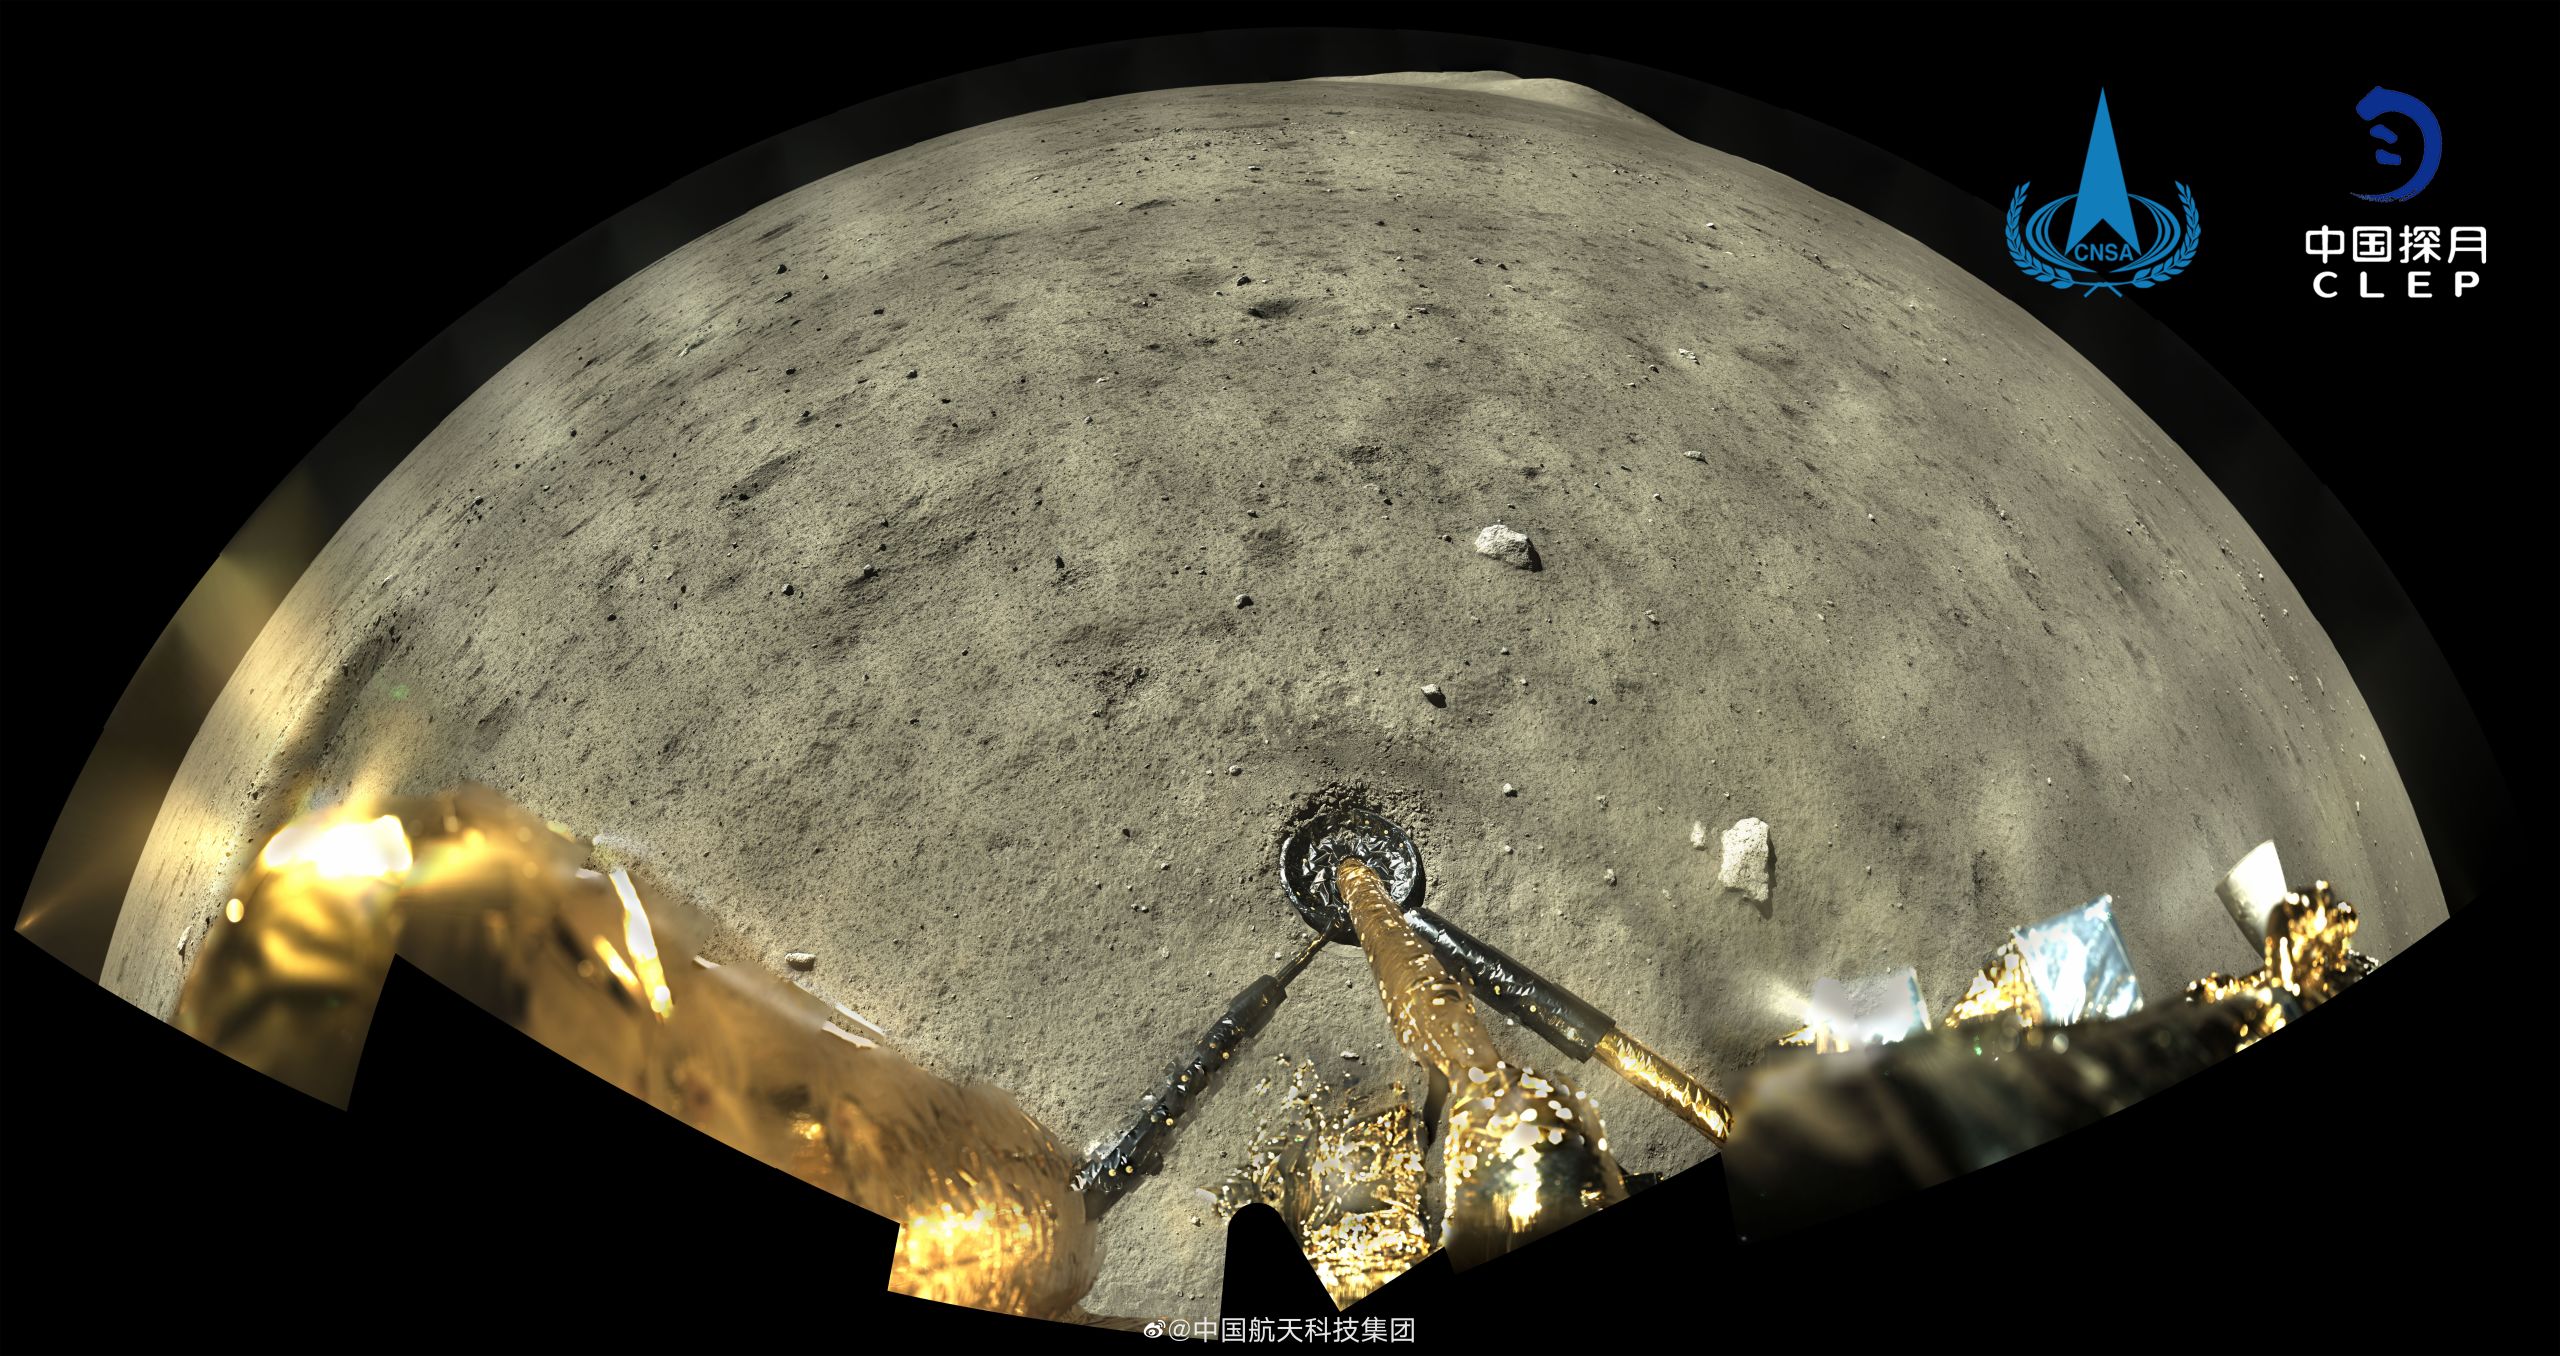 A panoramic image of the moon's surface taken by Chang'e-5, December 2020.